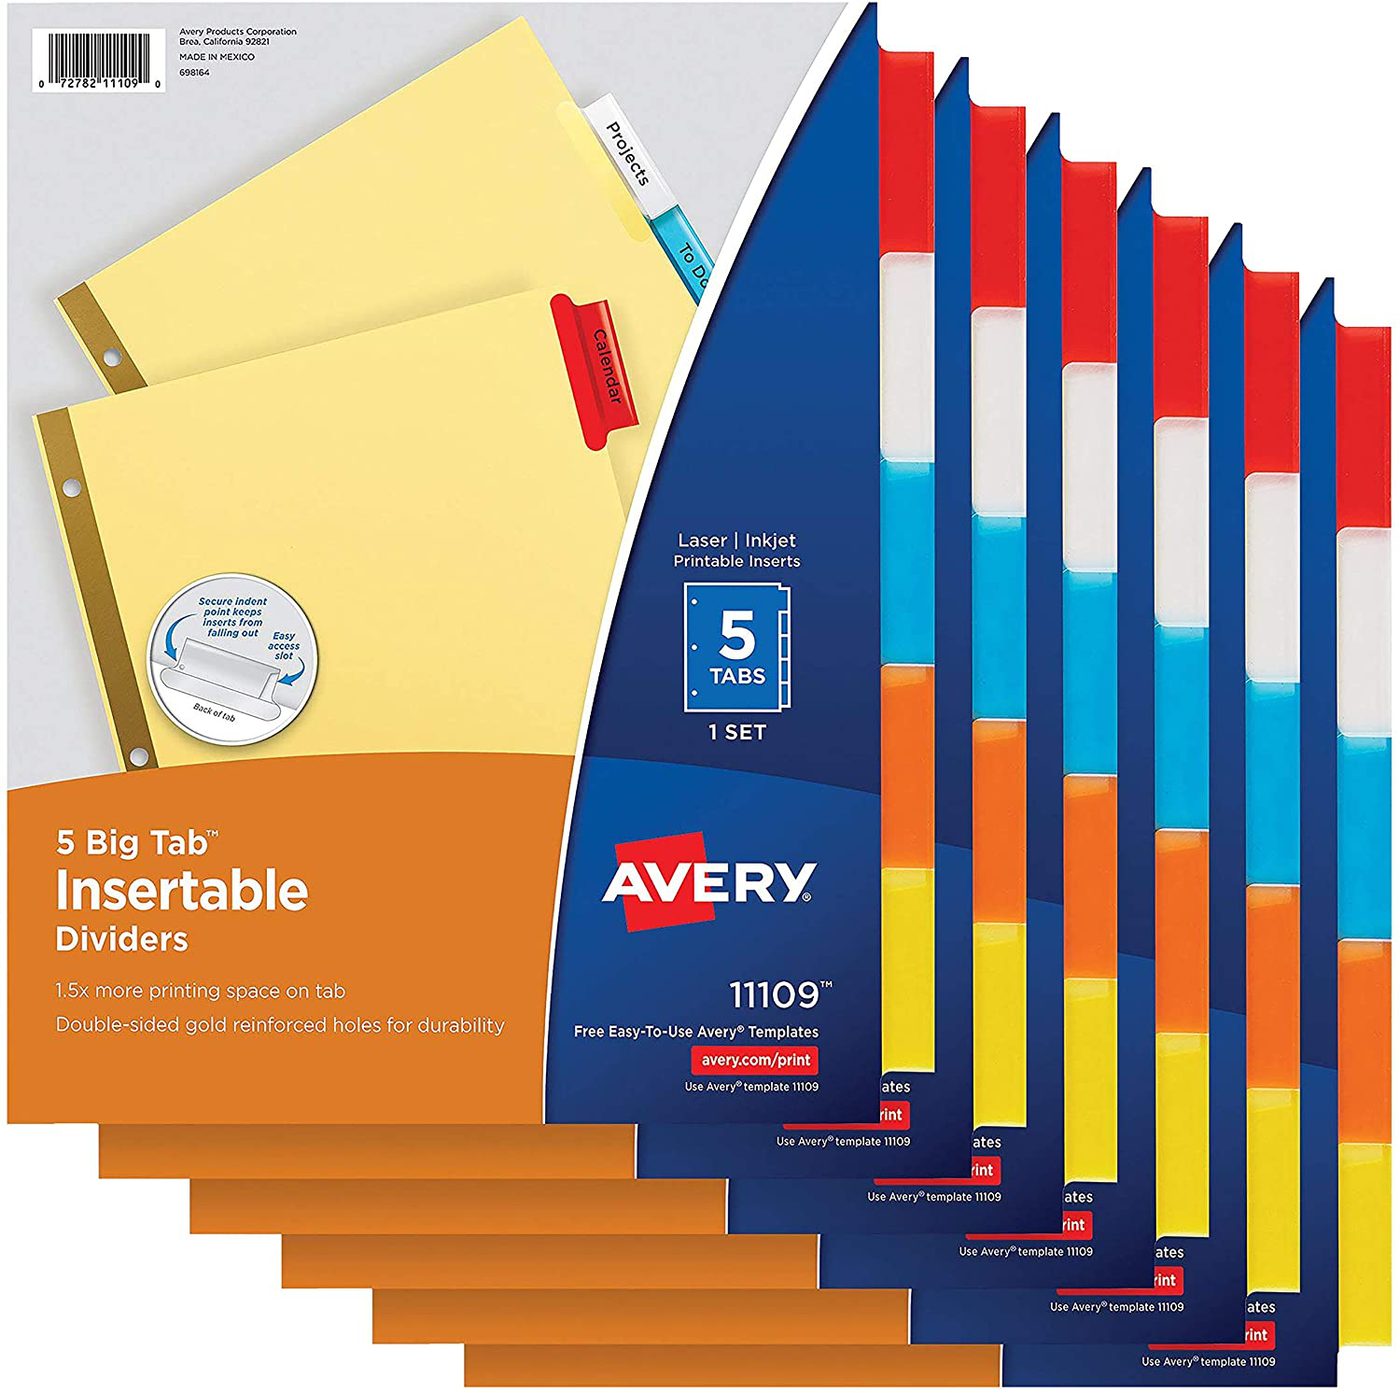 AVERY 11109 5-Tab Binder Dividers, Insertable Multicolor Big Tabs, 6 Sets